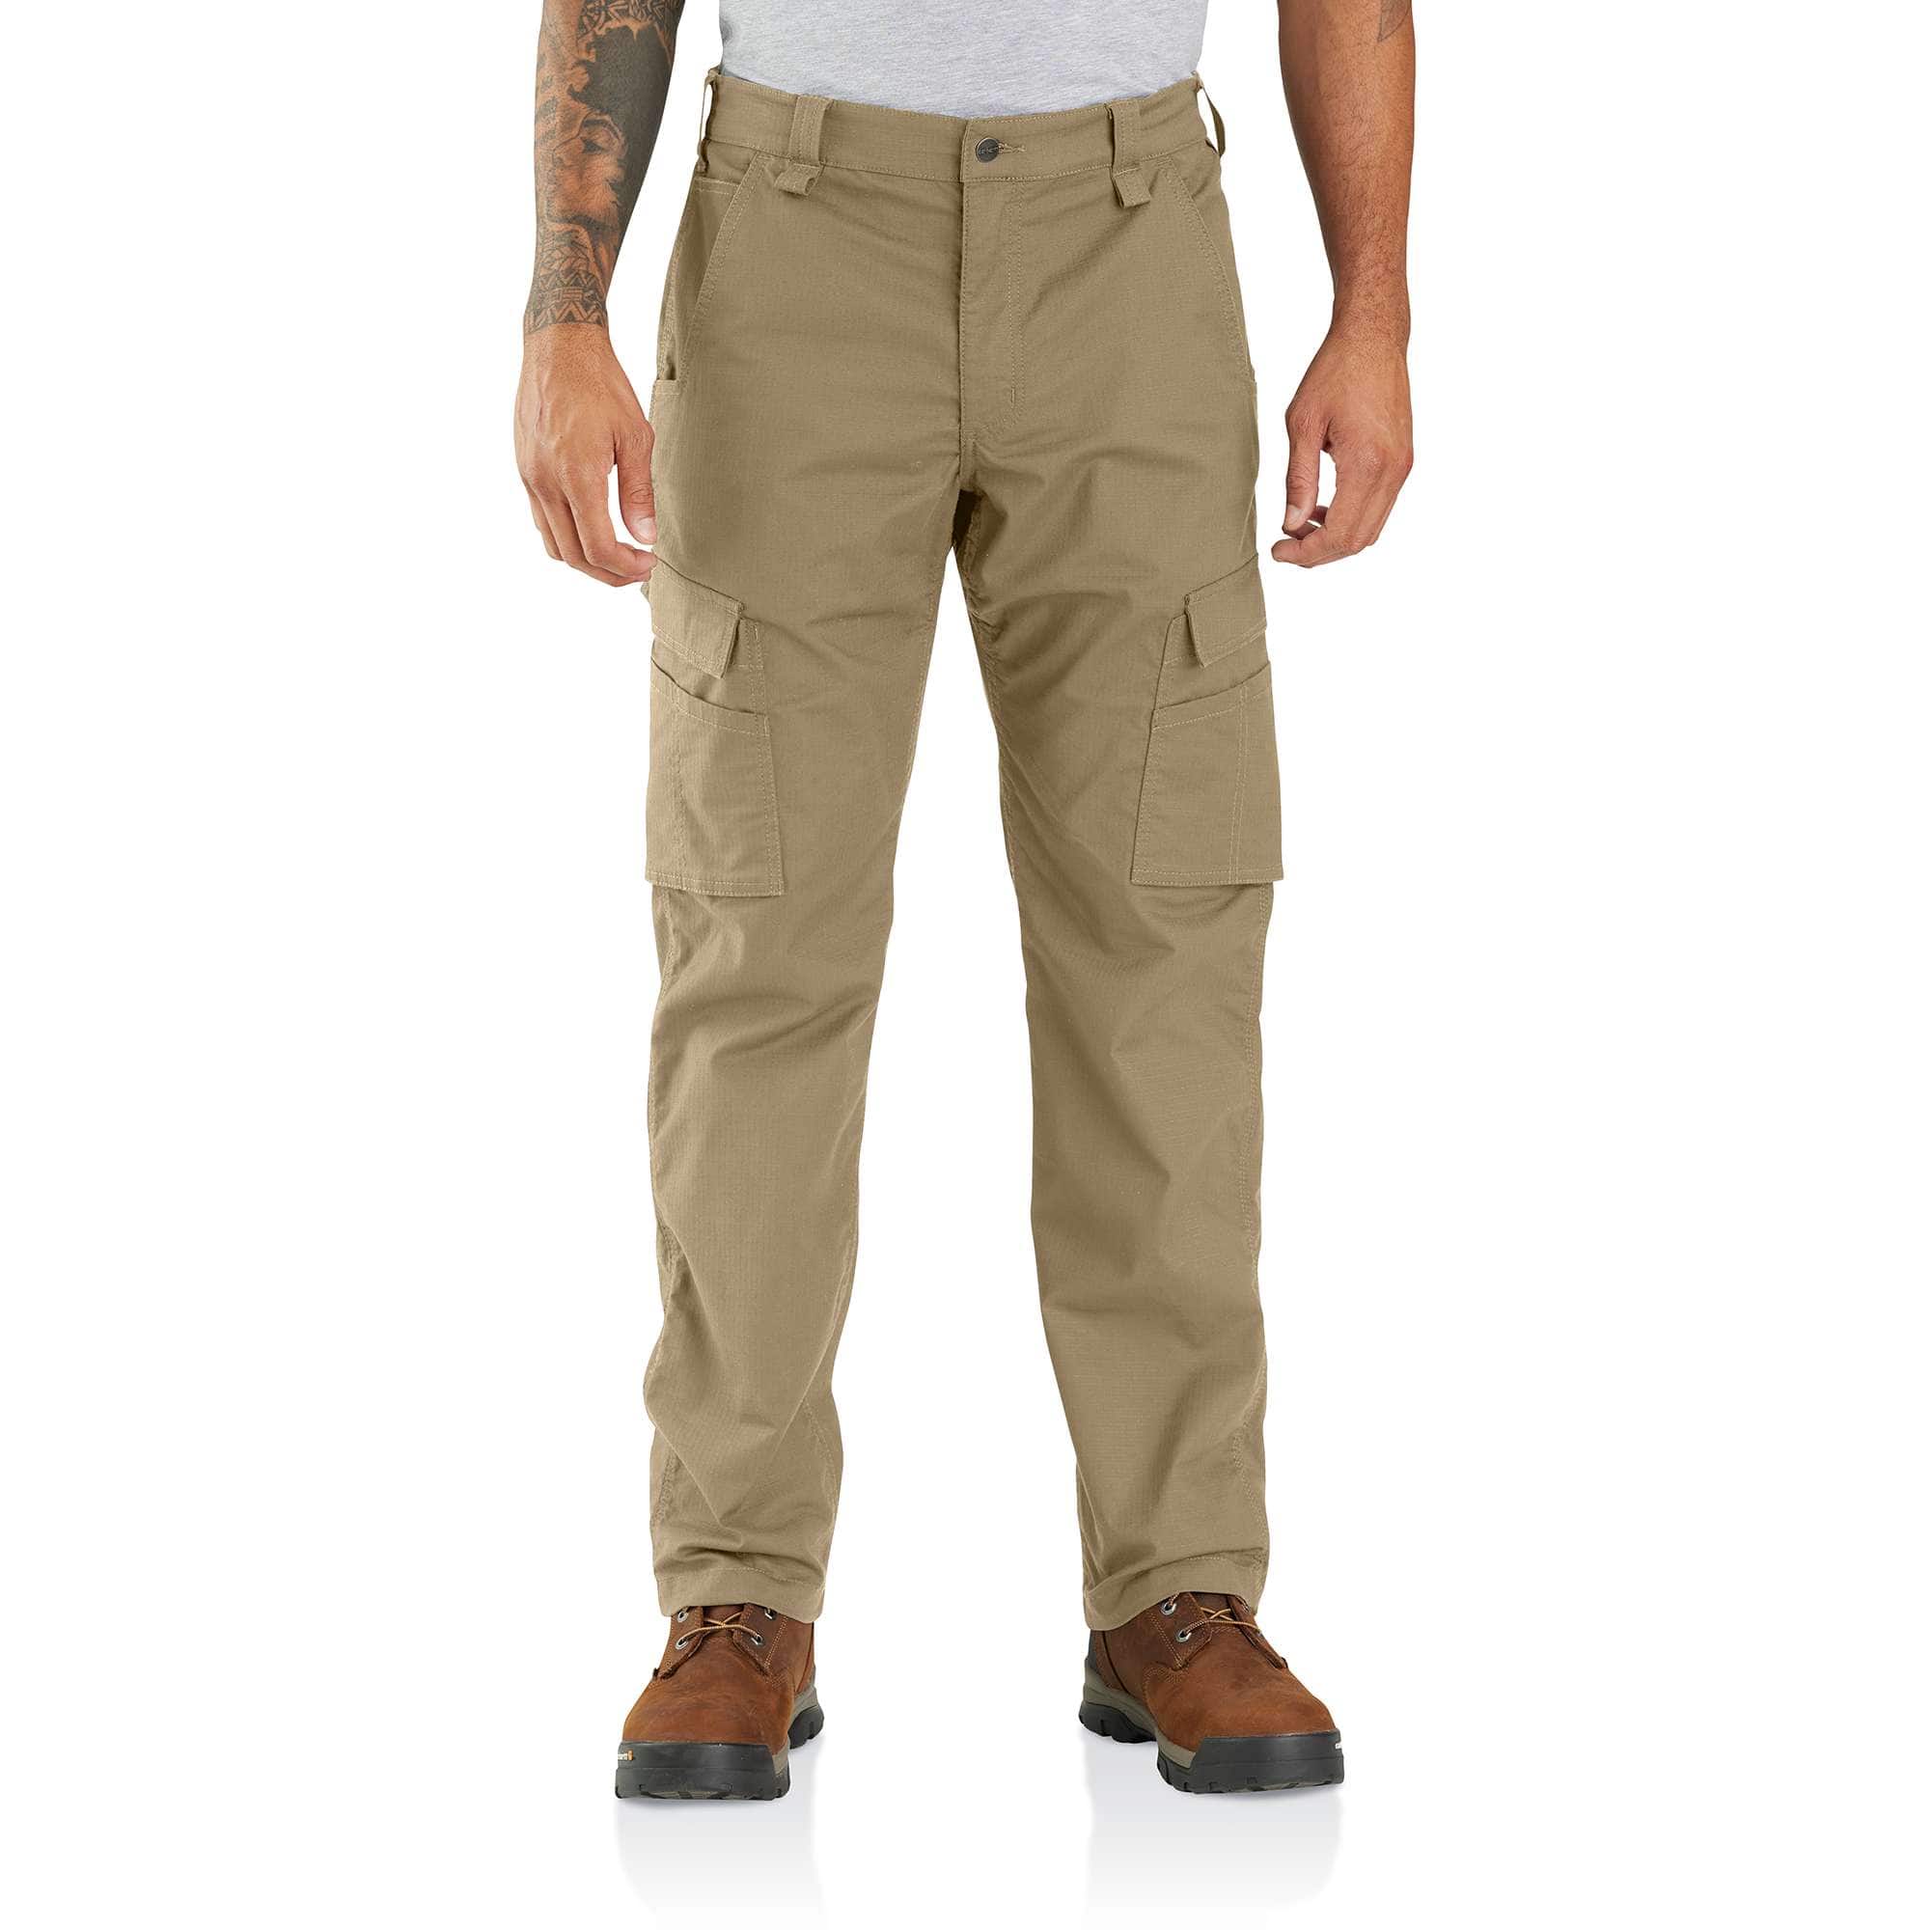  Warehouse Deals Today Vacation Men's Relaxed Fit Stretch Cargo  Pant Lightweight Quick Dry Joggers Combat Work Pants with Pockets Khaki  XXXXXL : Clothing, Shoes & Jewelry